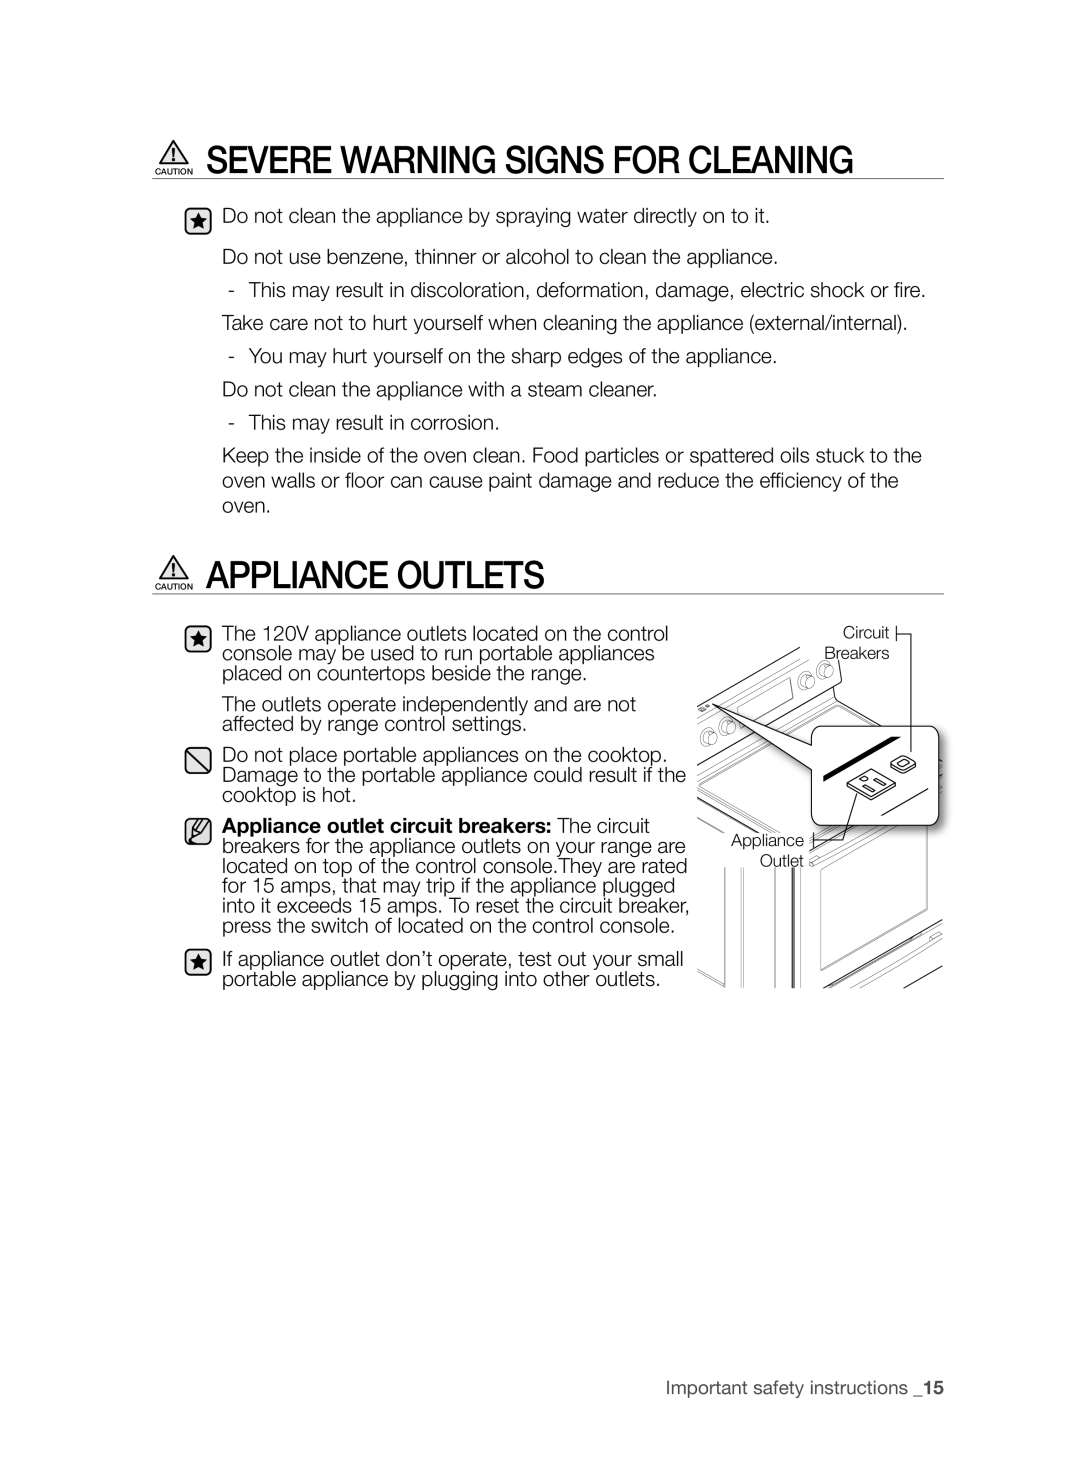 Samsung FE-R700WX, DG68-00294A user manual Caution Severe Warning Signs For Cleaning, Caution Appliance Outlets 